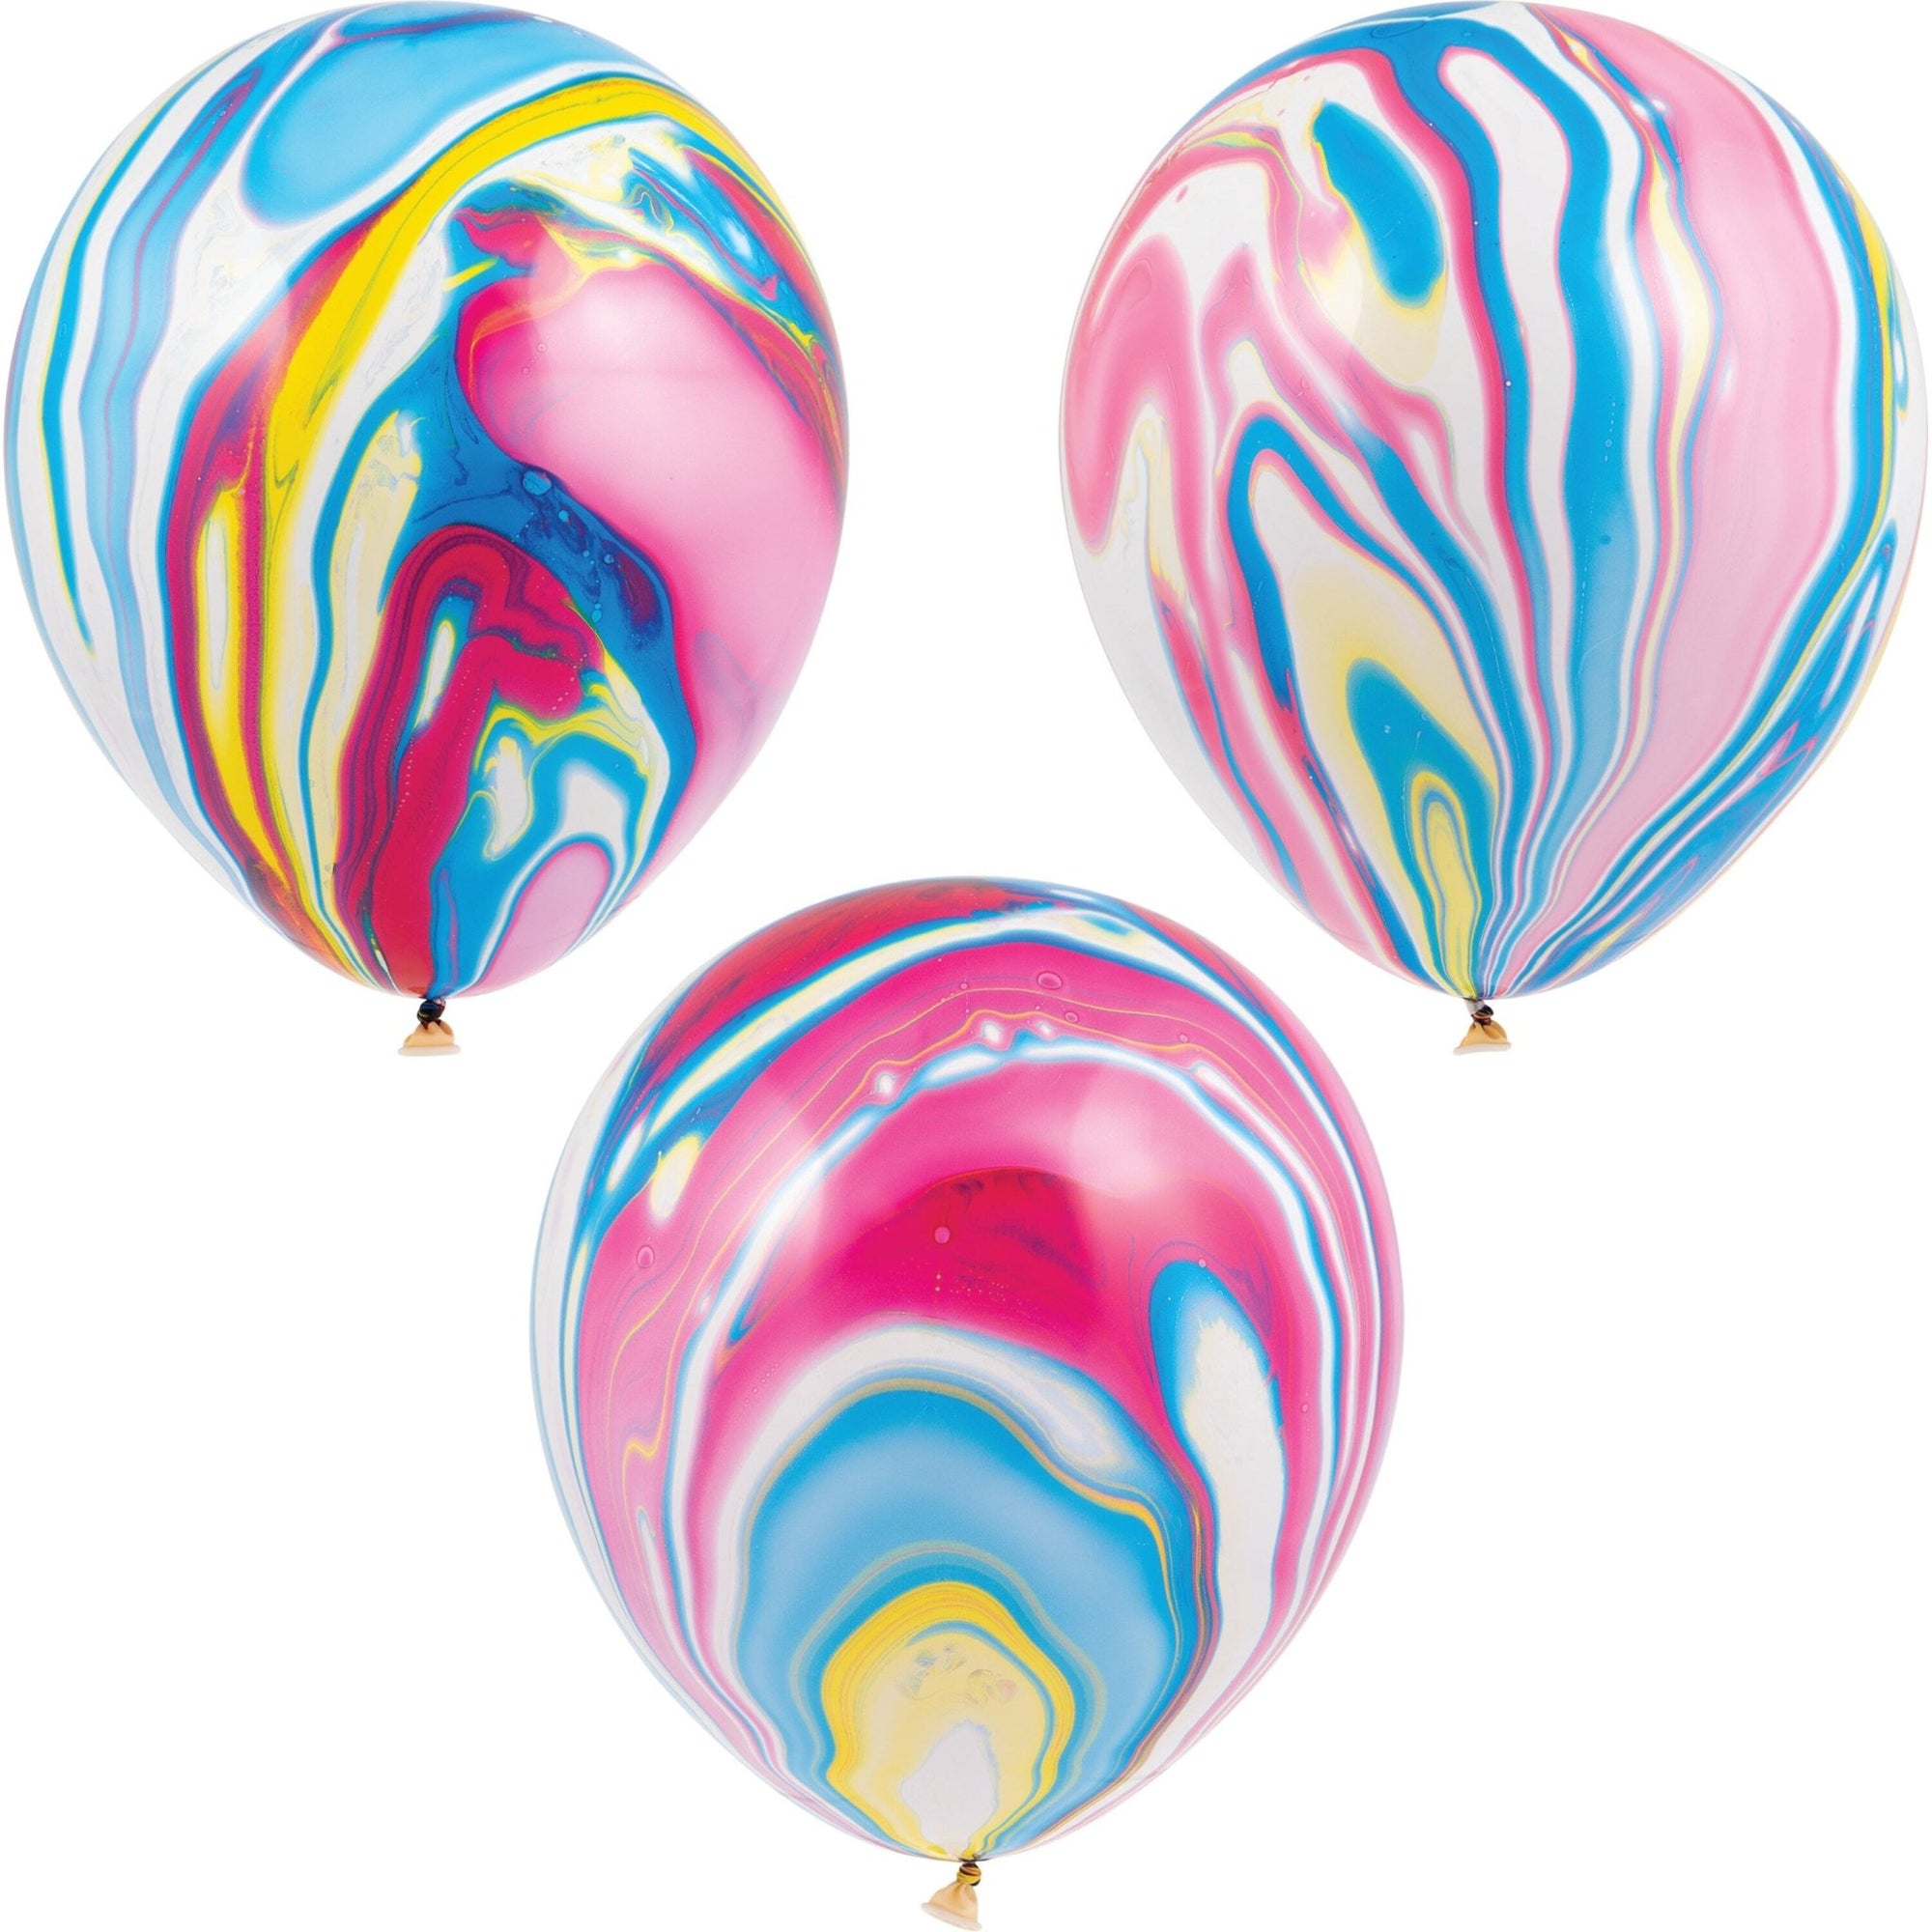 Tie Dye Marble Latex Balloons 12ct - Stesha Party